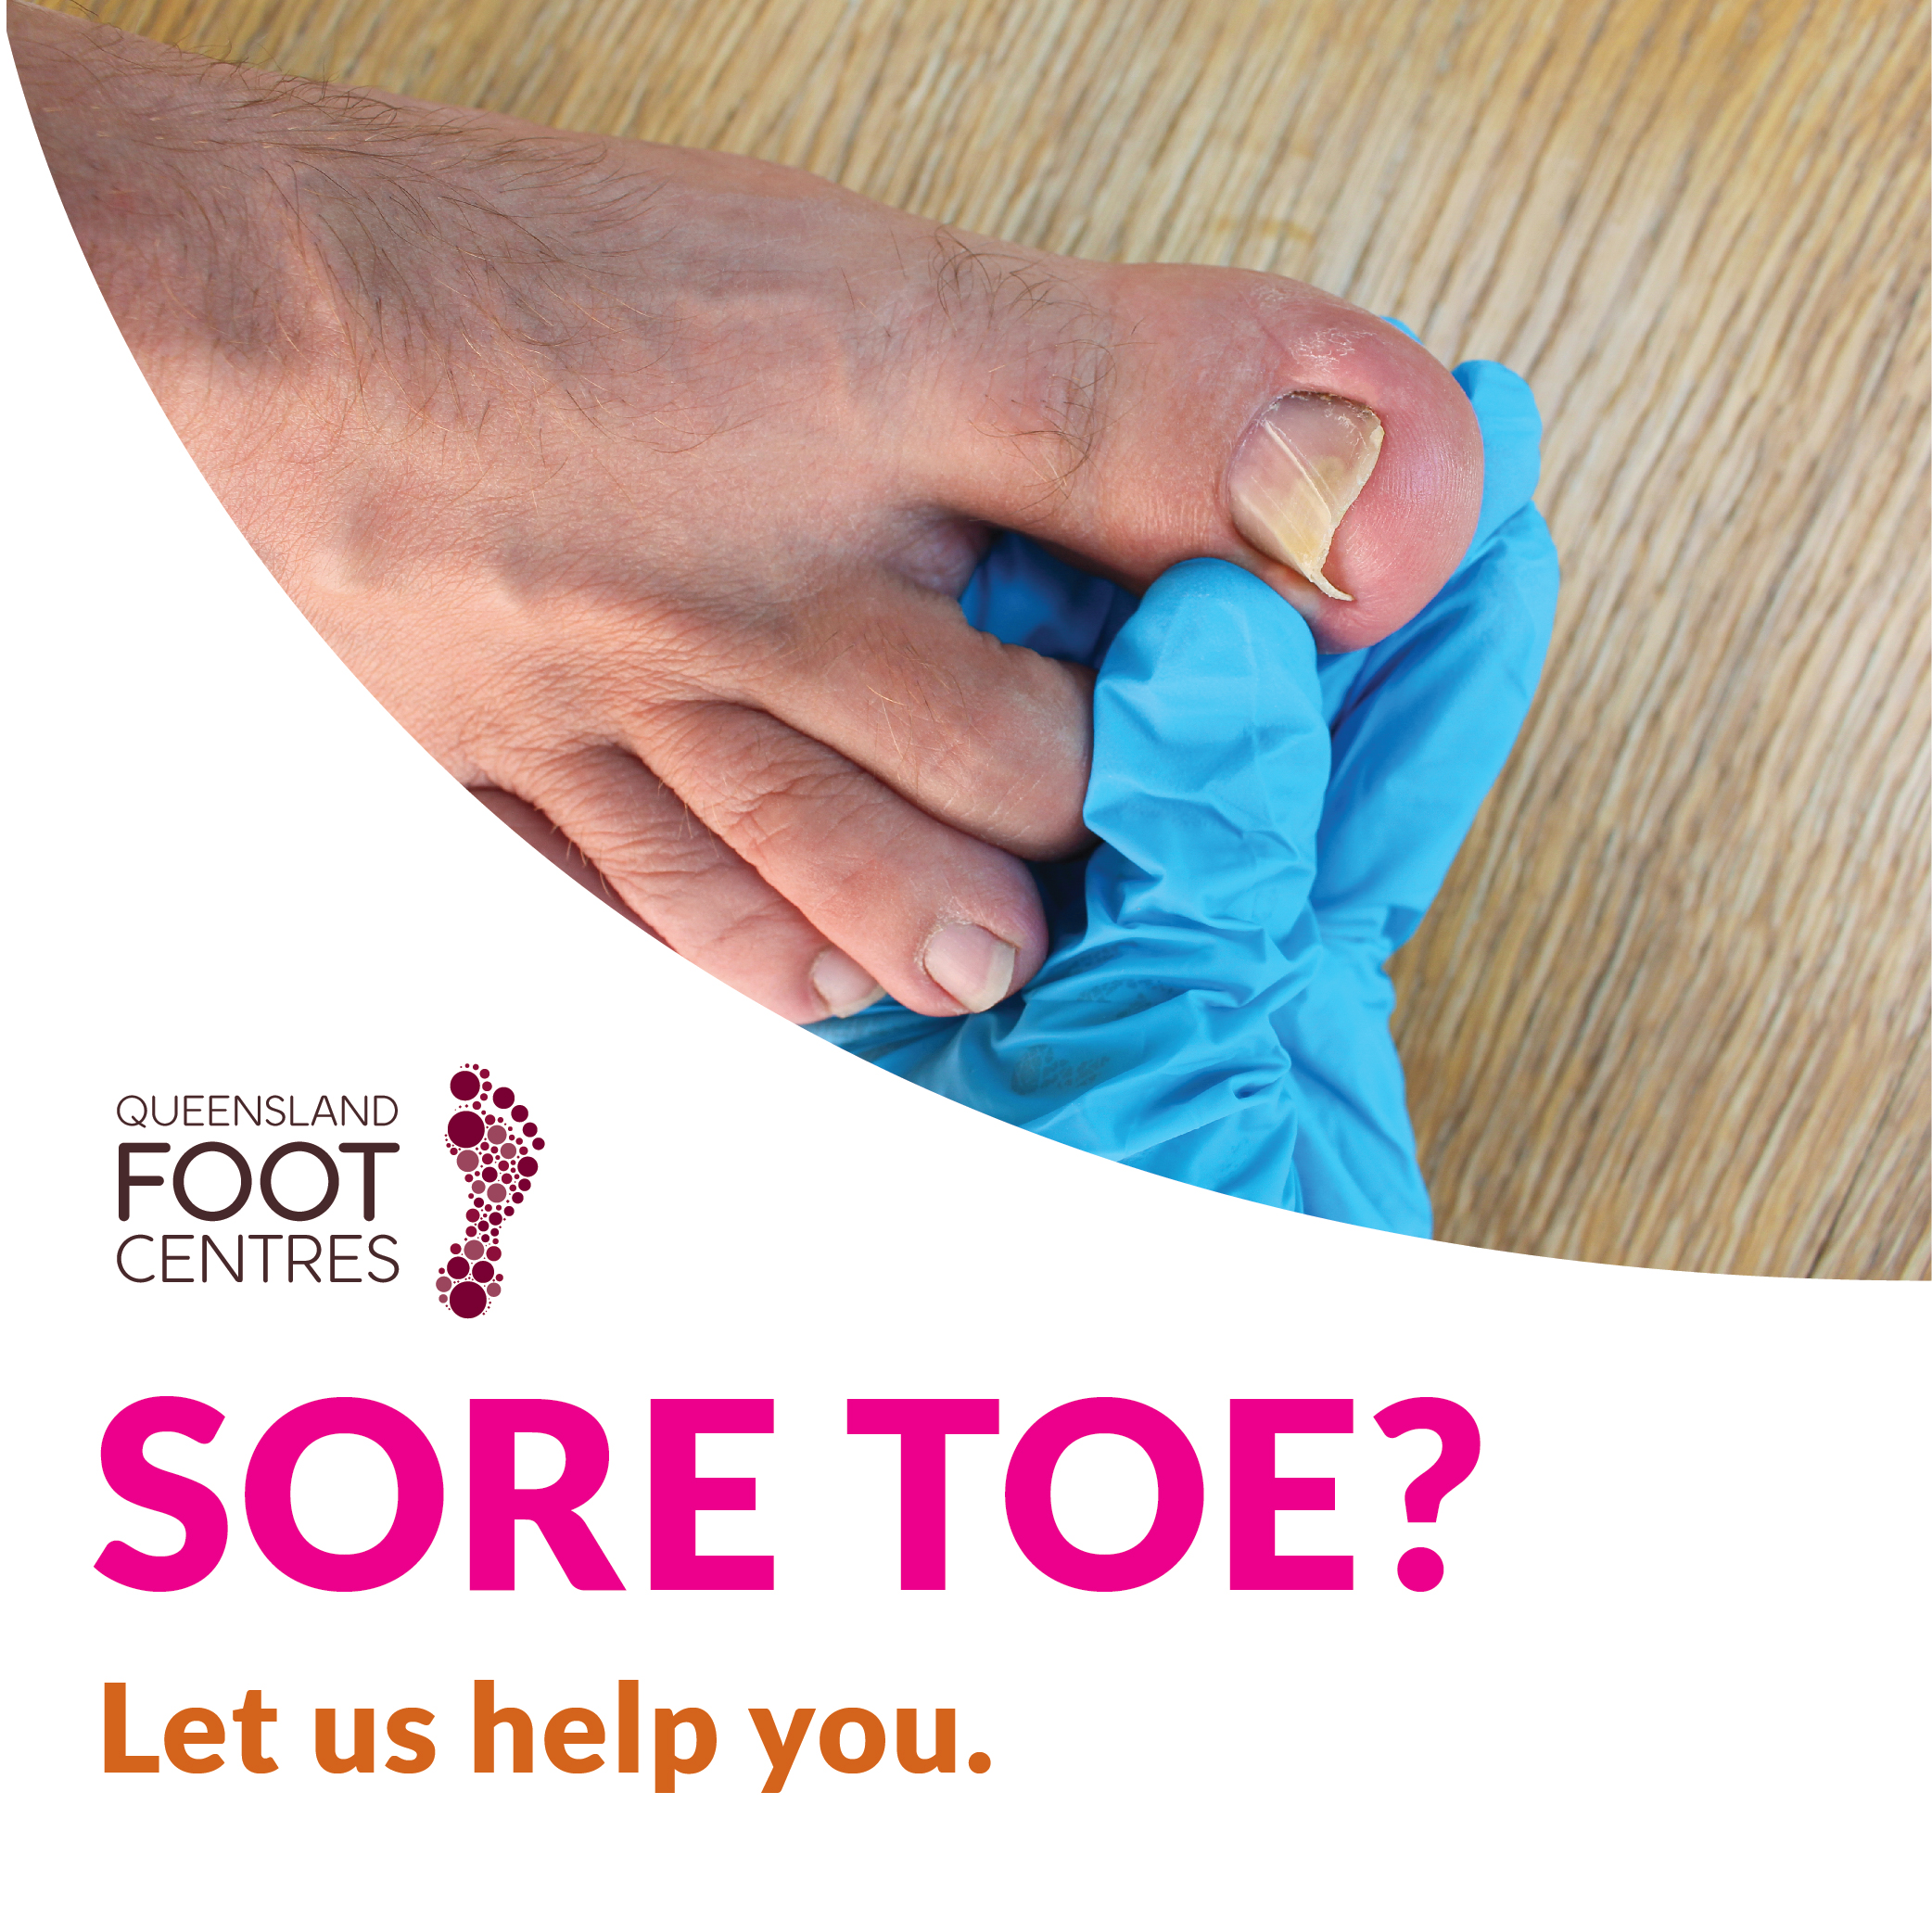 Sore Toe? Let us help you